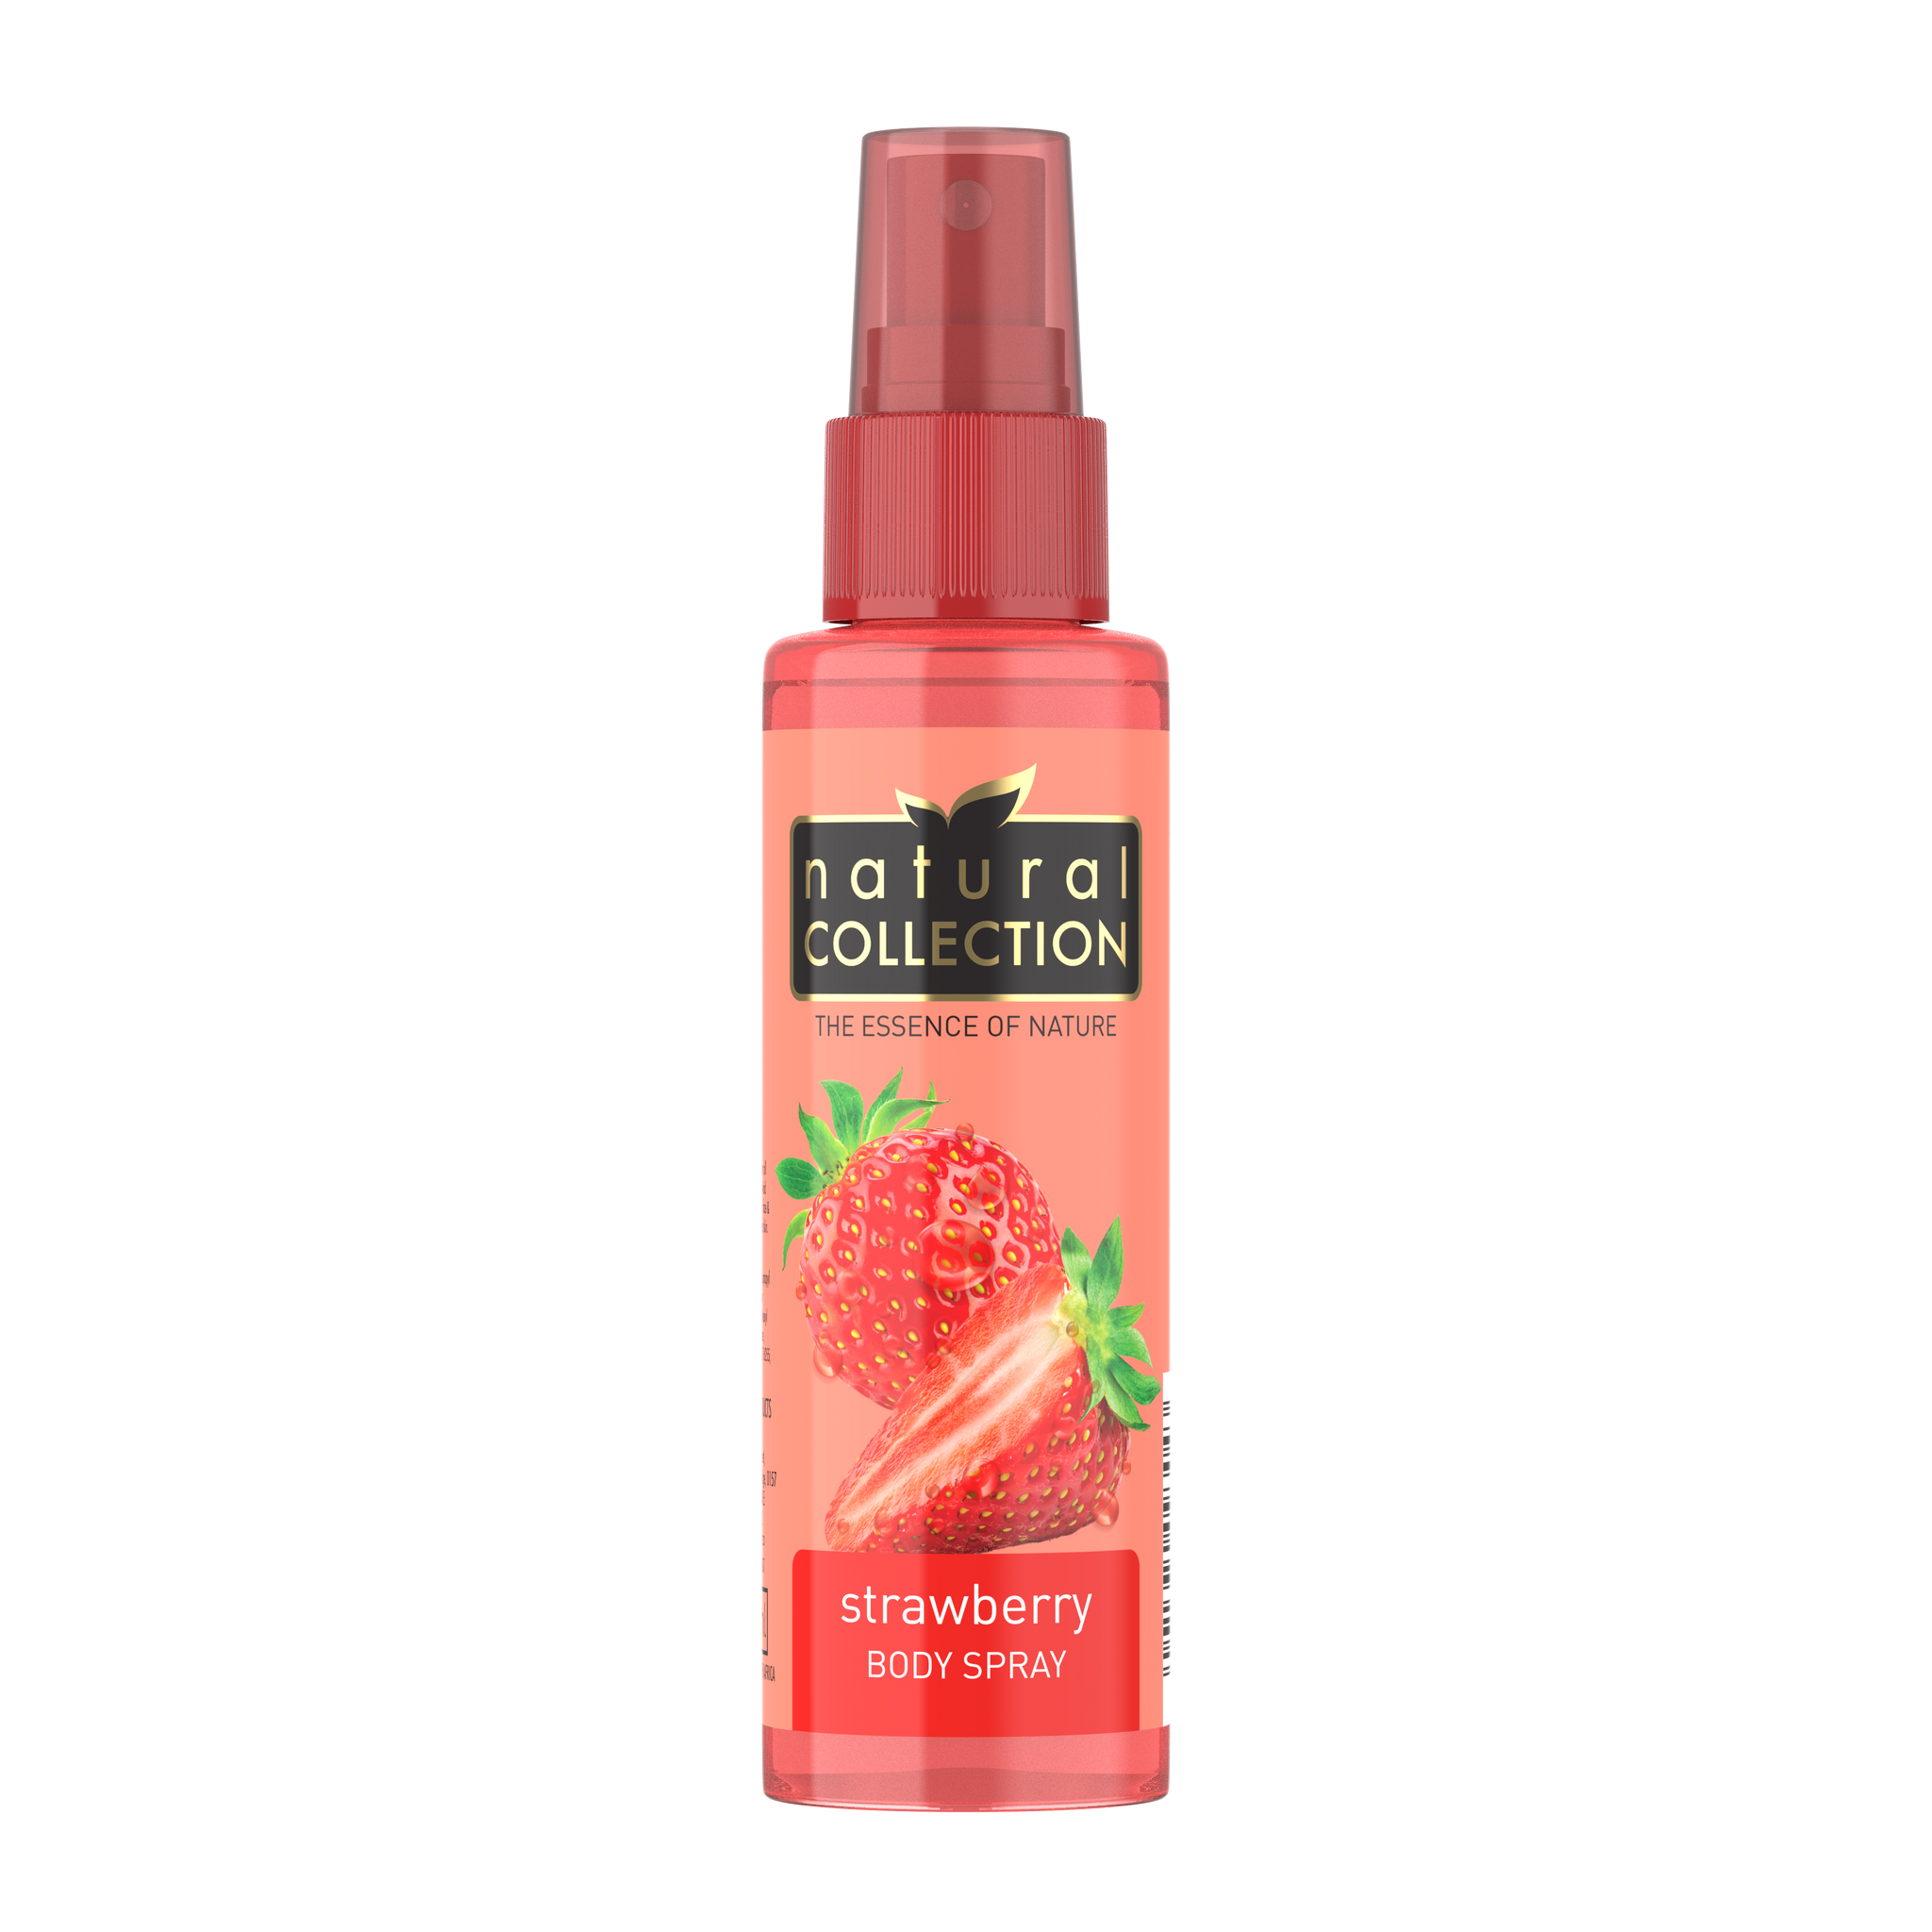 Natural Collection Strawberry Body Spray - 150ml - 72 Pack